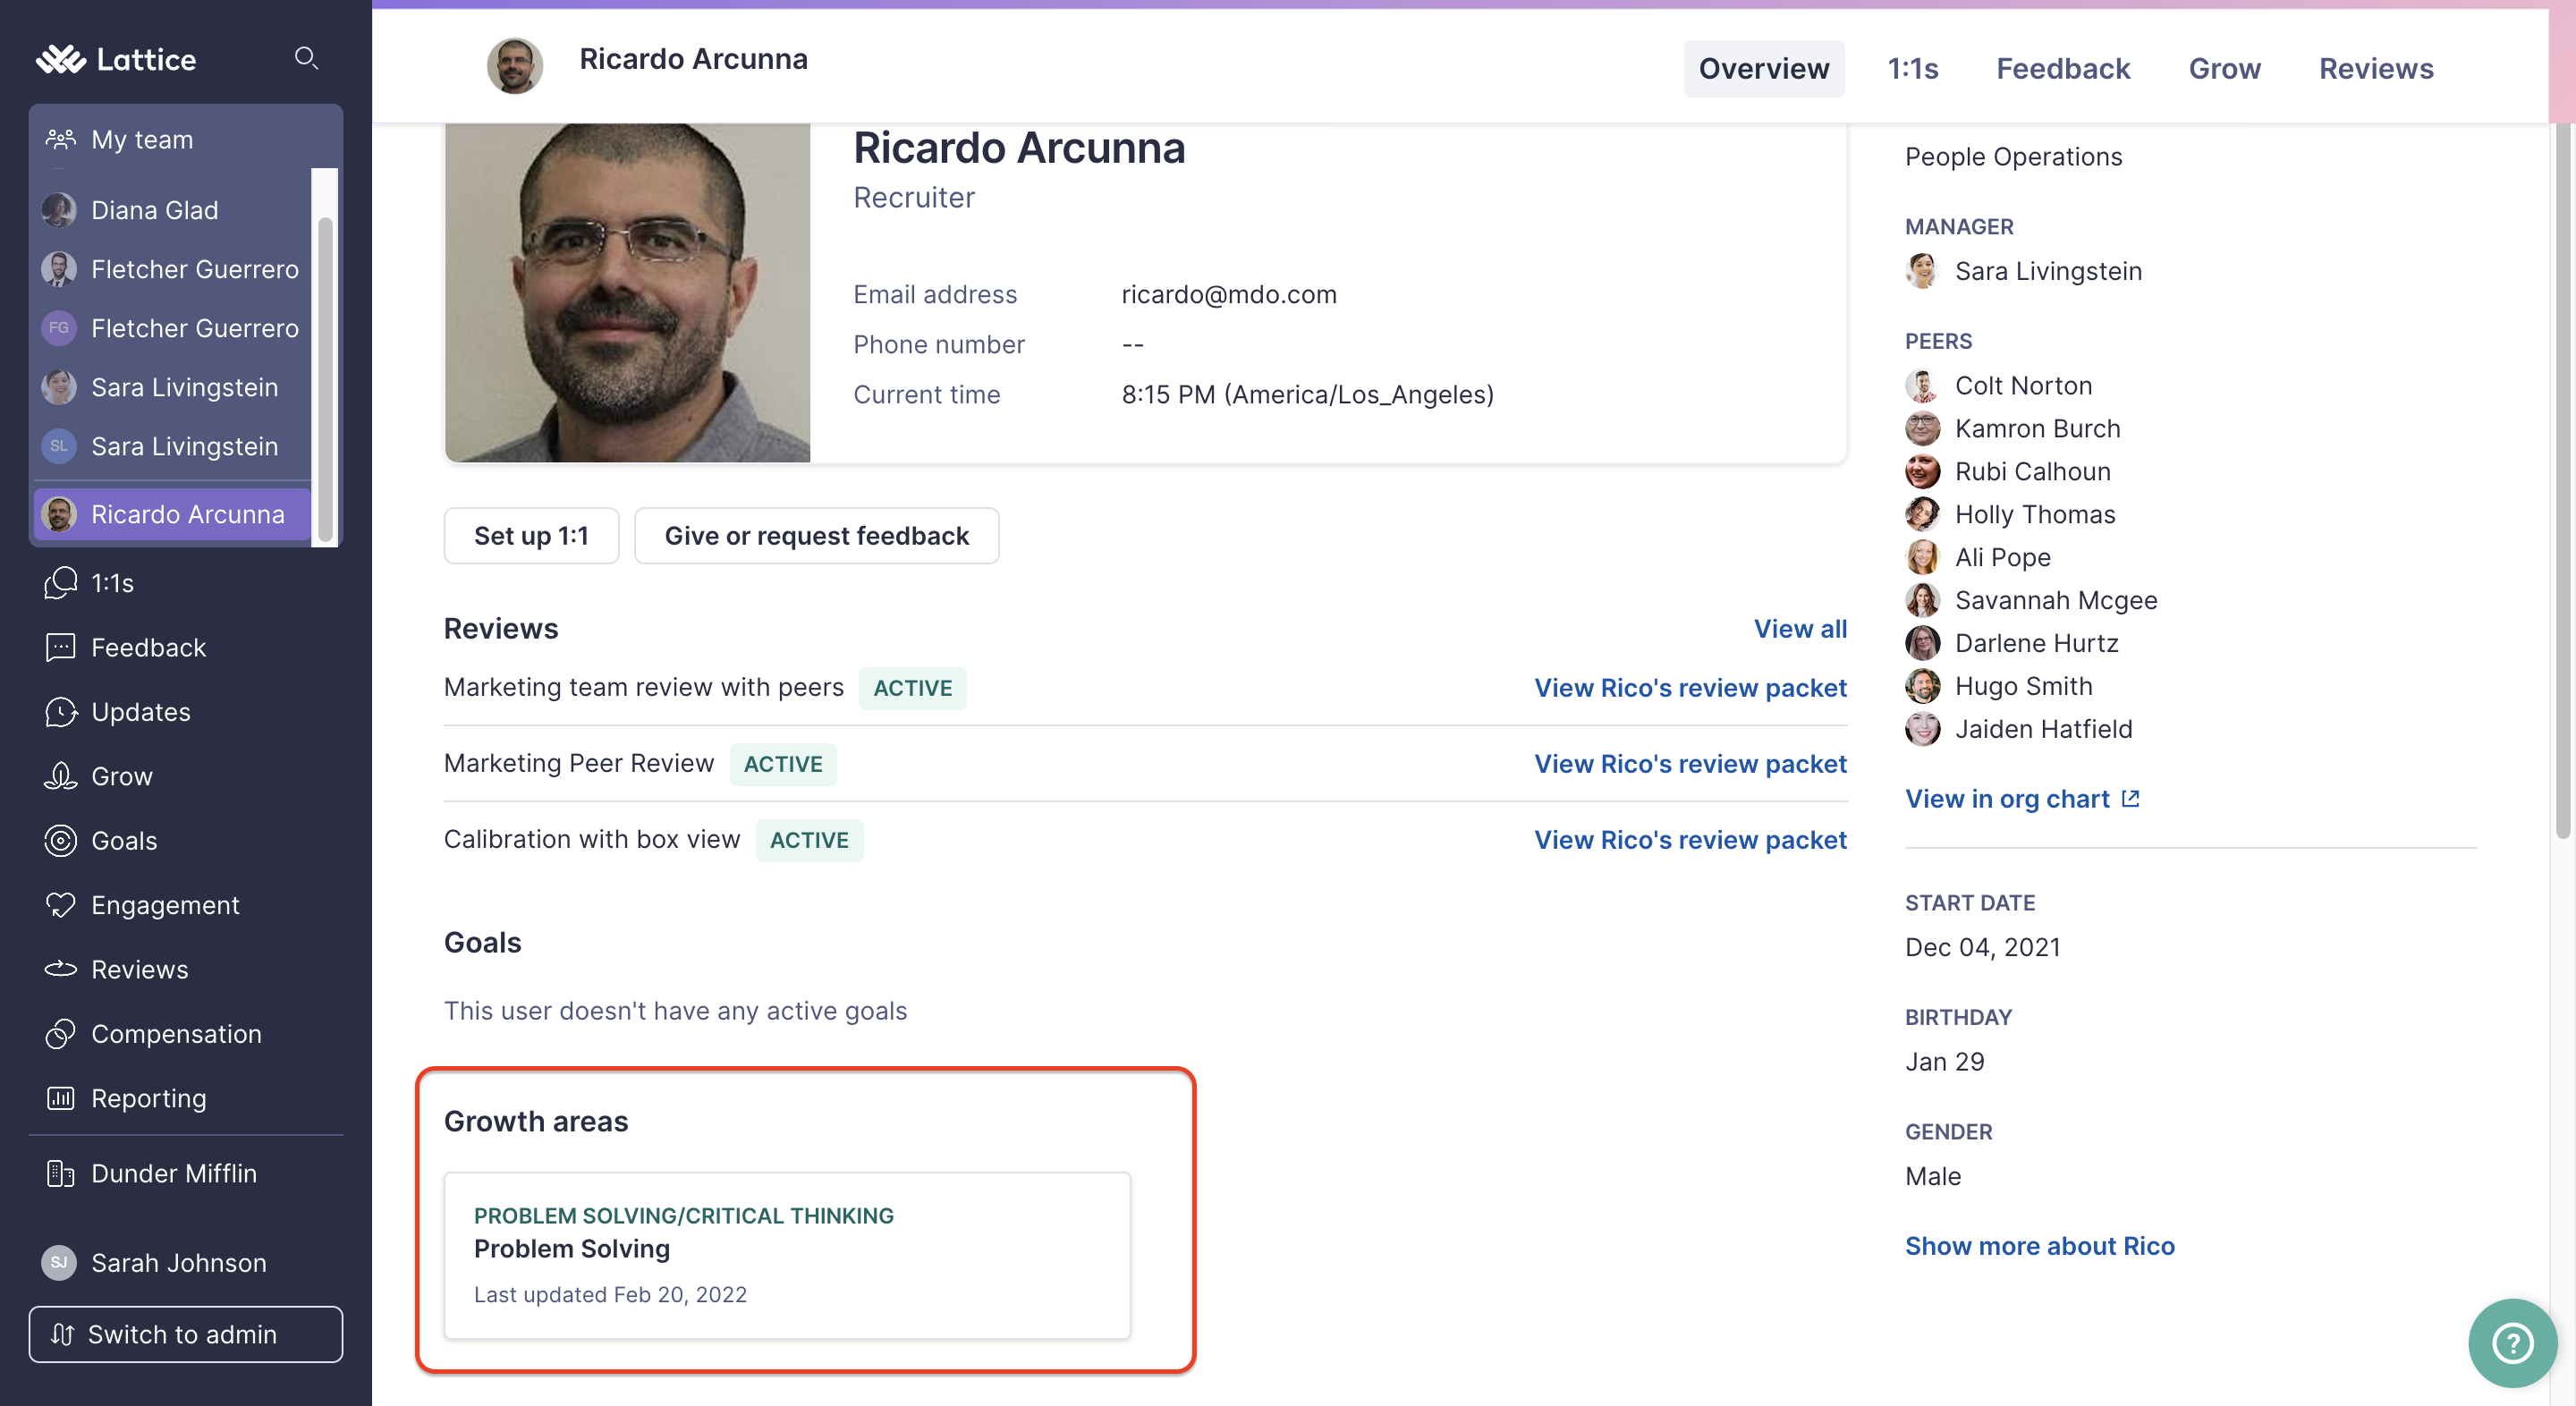 Employee Overview page for Ricardo Arcunna. A square highlights the Growth area section.